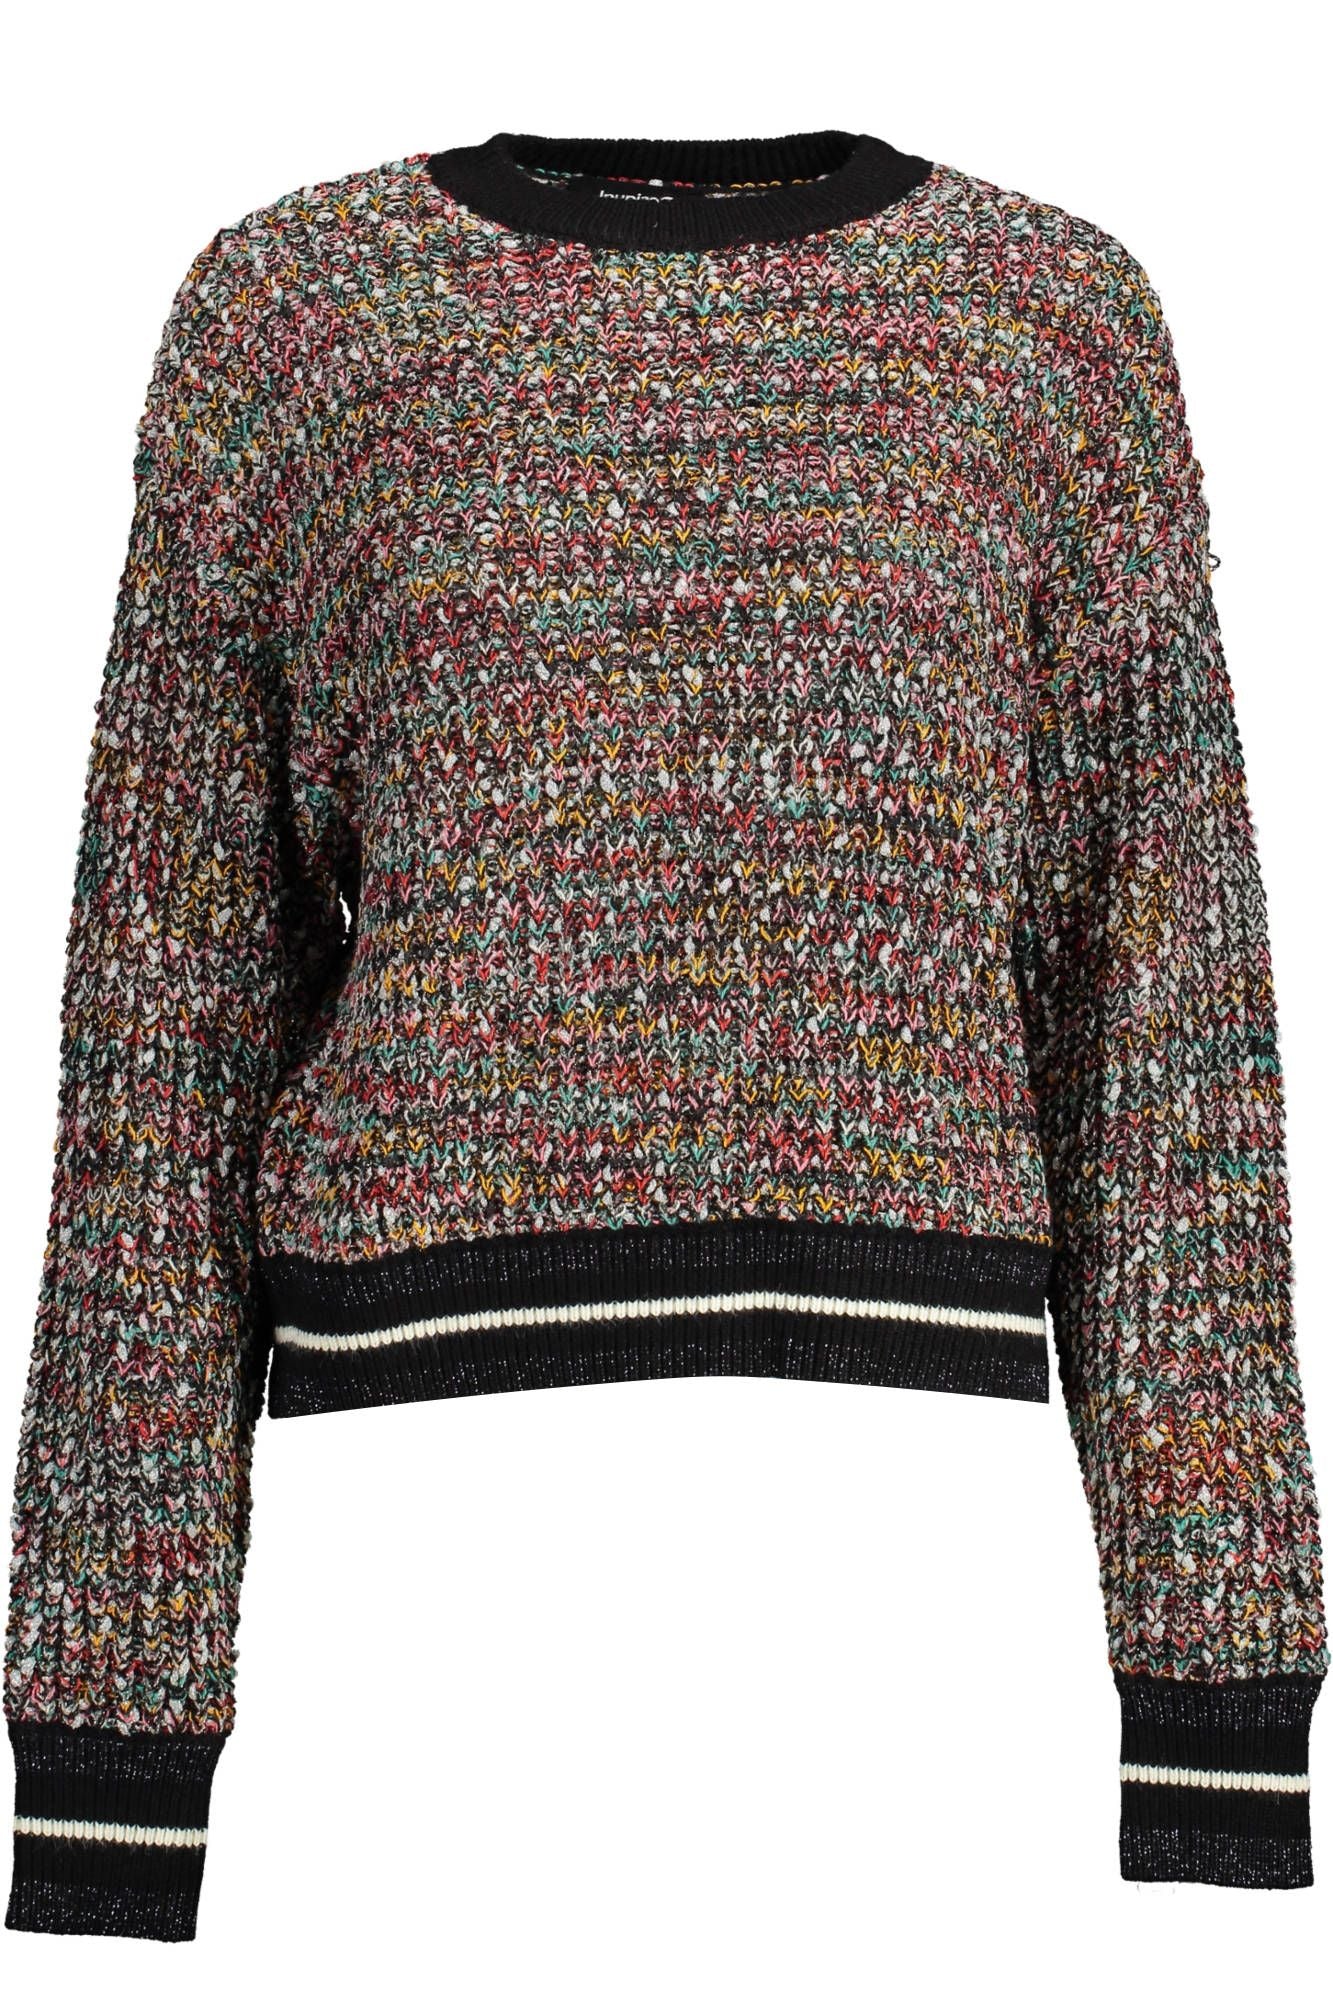 Desigual Enigmatic Black Sweater with Contrasting Details